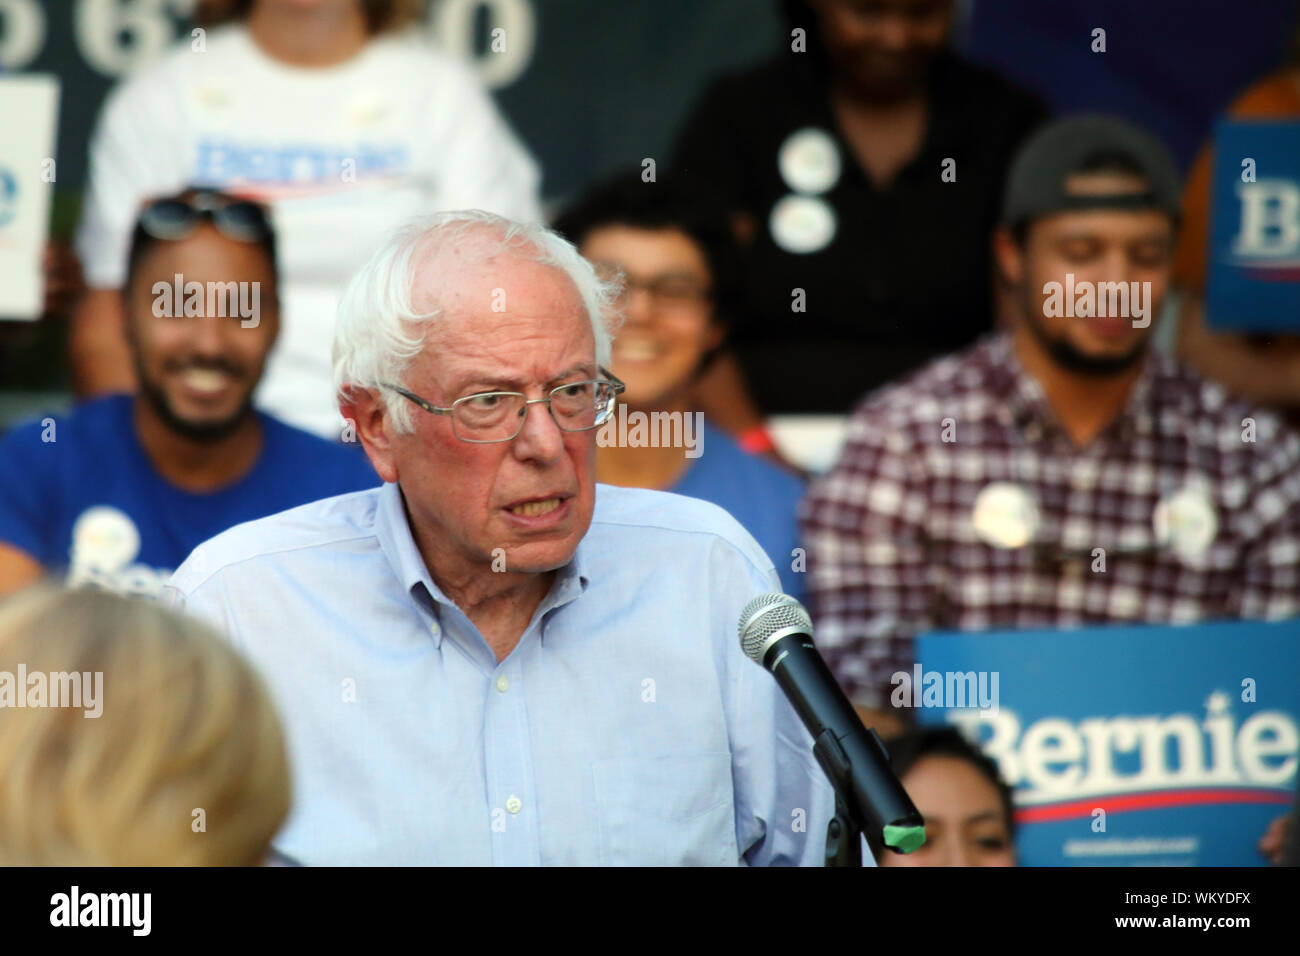 2020 Presidential candidate Bernie Sanders speaks on stage during his Climate Change Crisis Townhall at Chapin Park in Myrtle Beach, South Carolina on Stock Photo